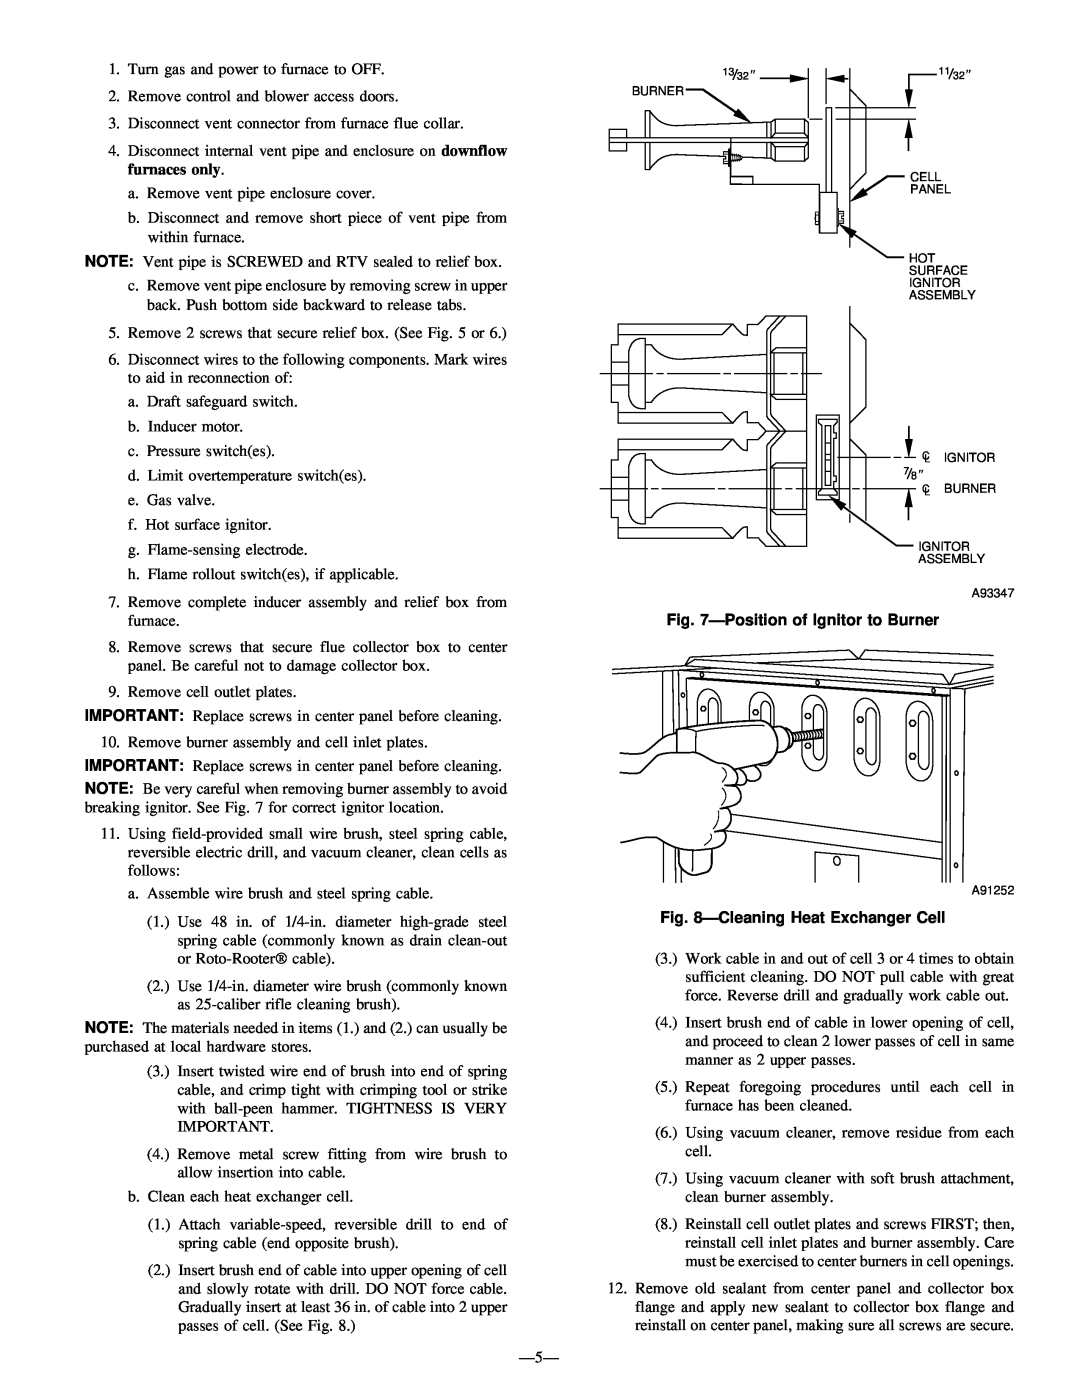 Bryant 330JAV, 331JAV instruction manual Positionof Ignitor to Burner, CleaningHeat Exchanger Cell 